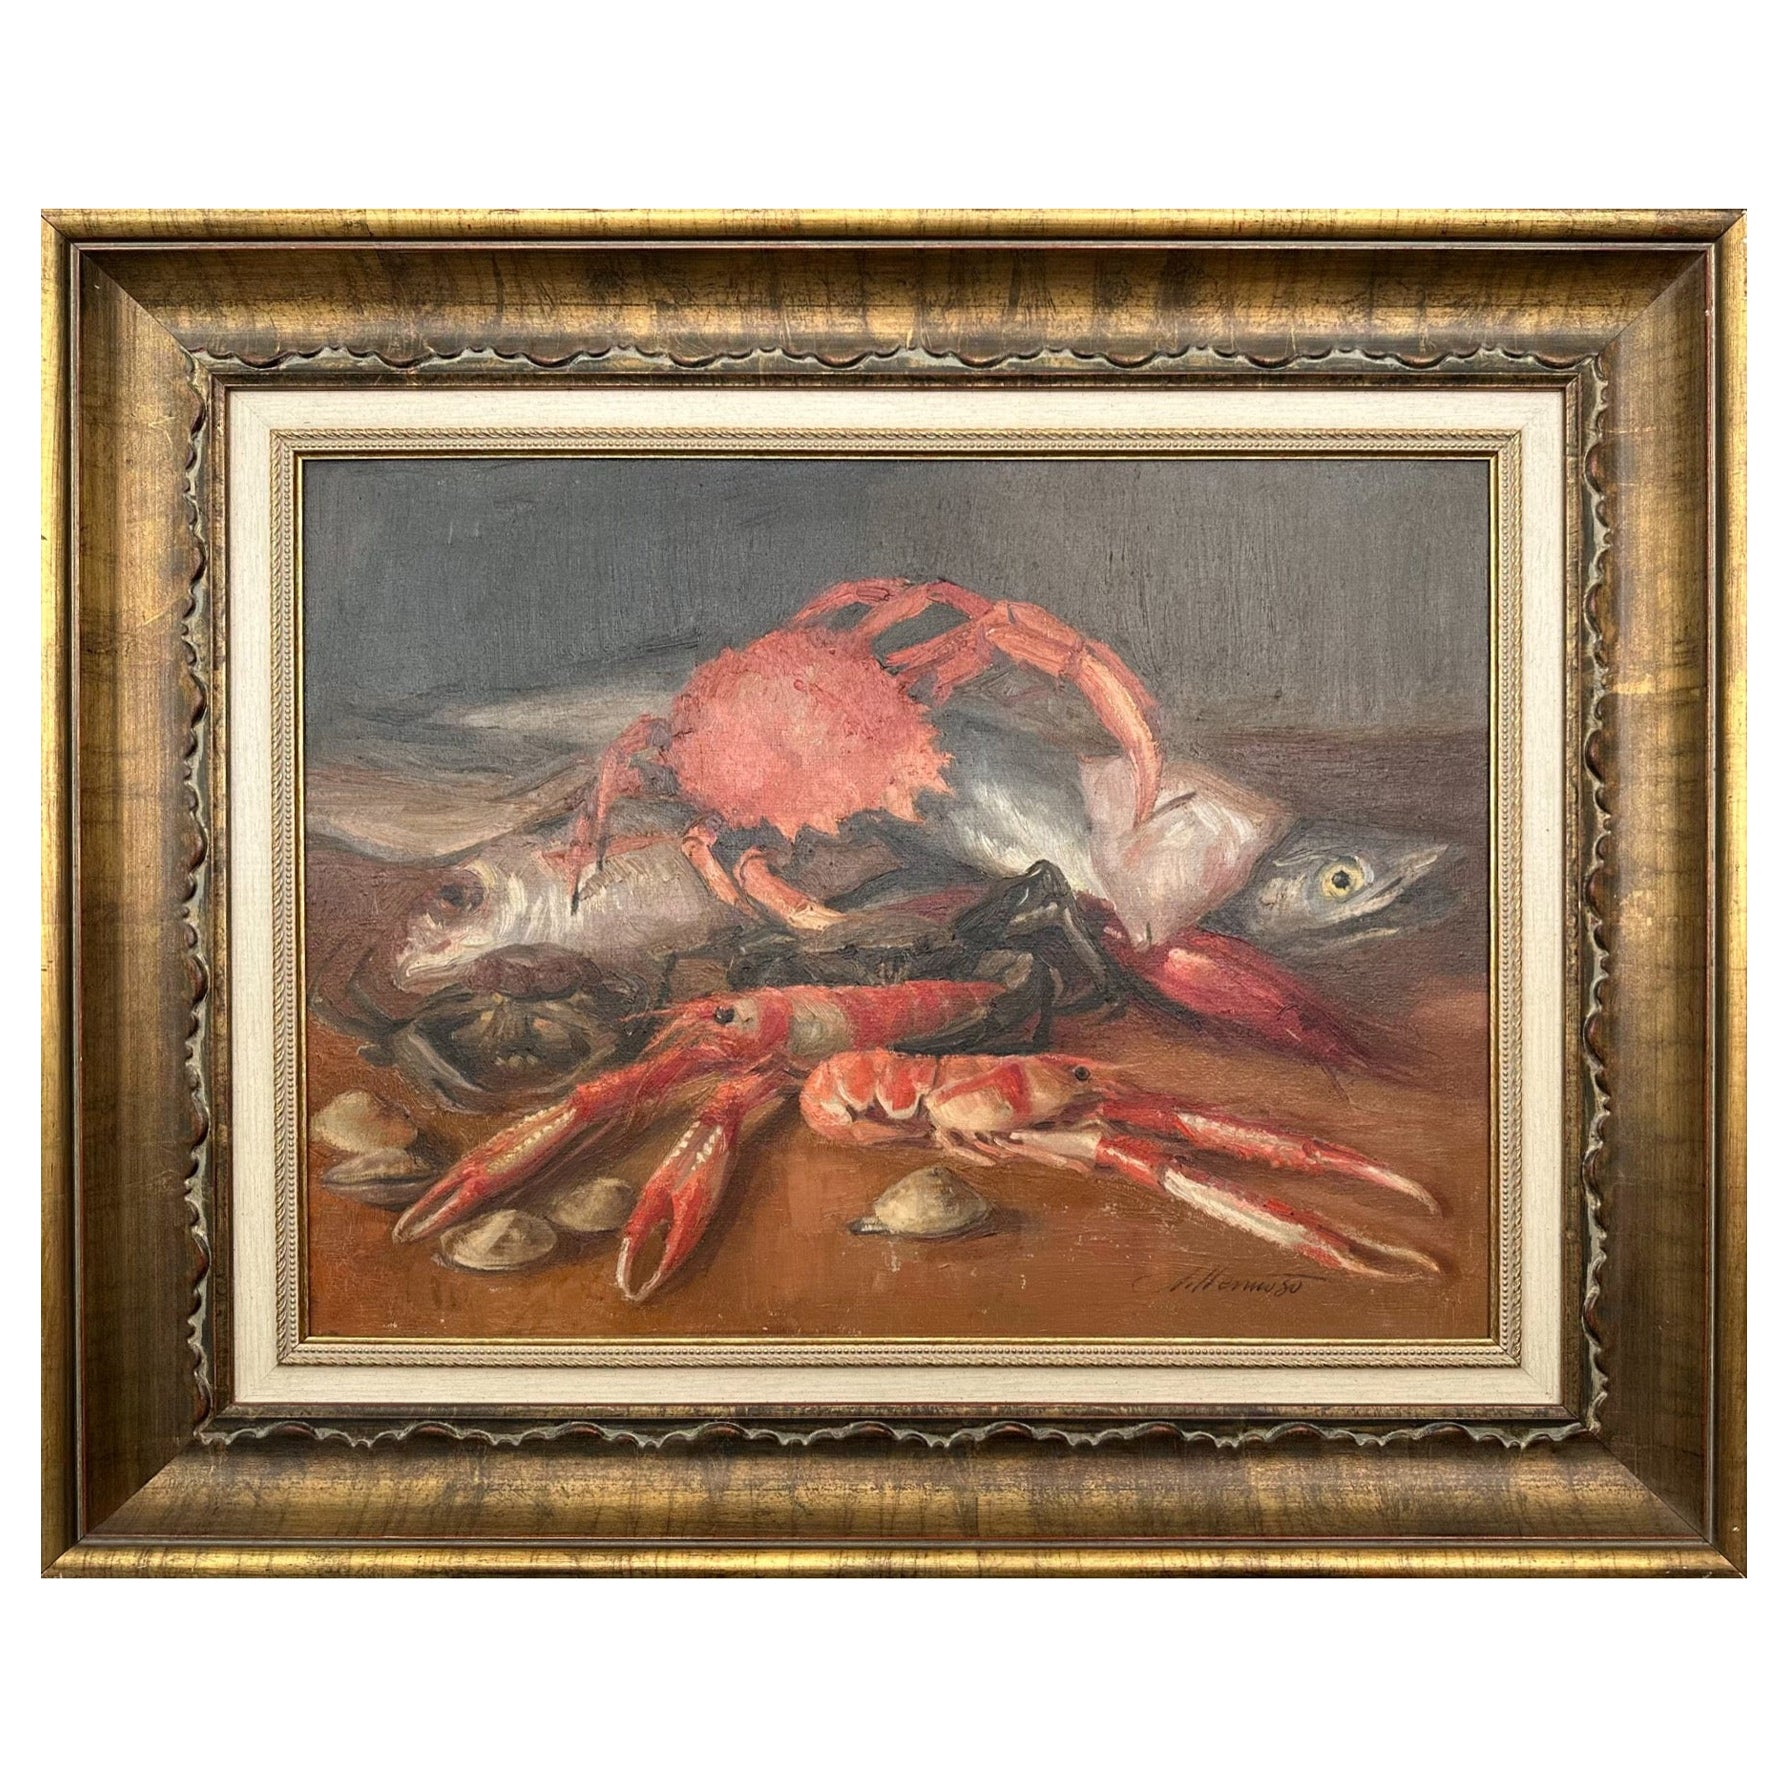 Oil painting about a Beautiful Crab and Fish